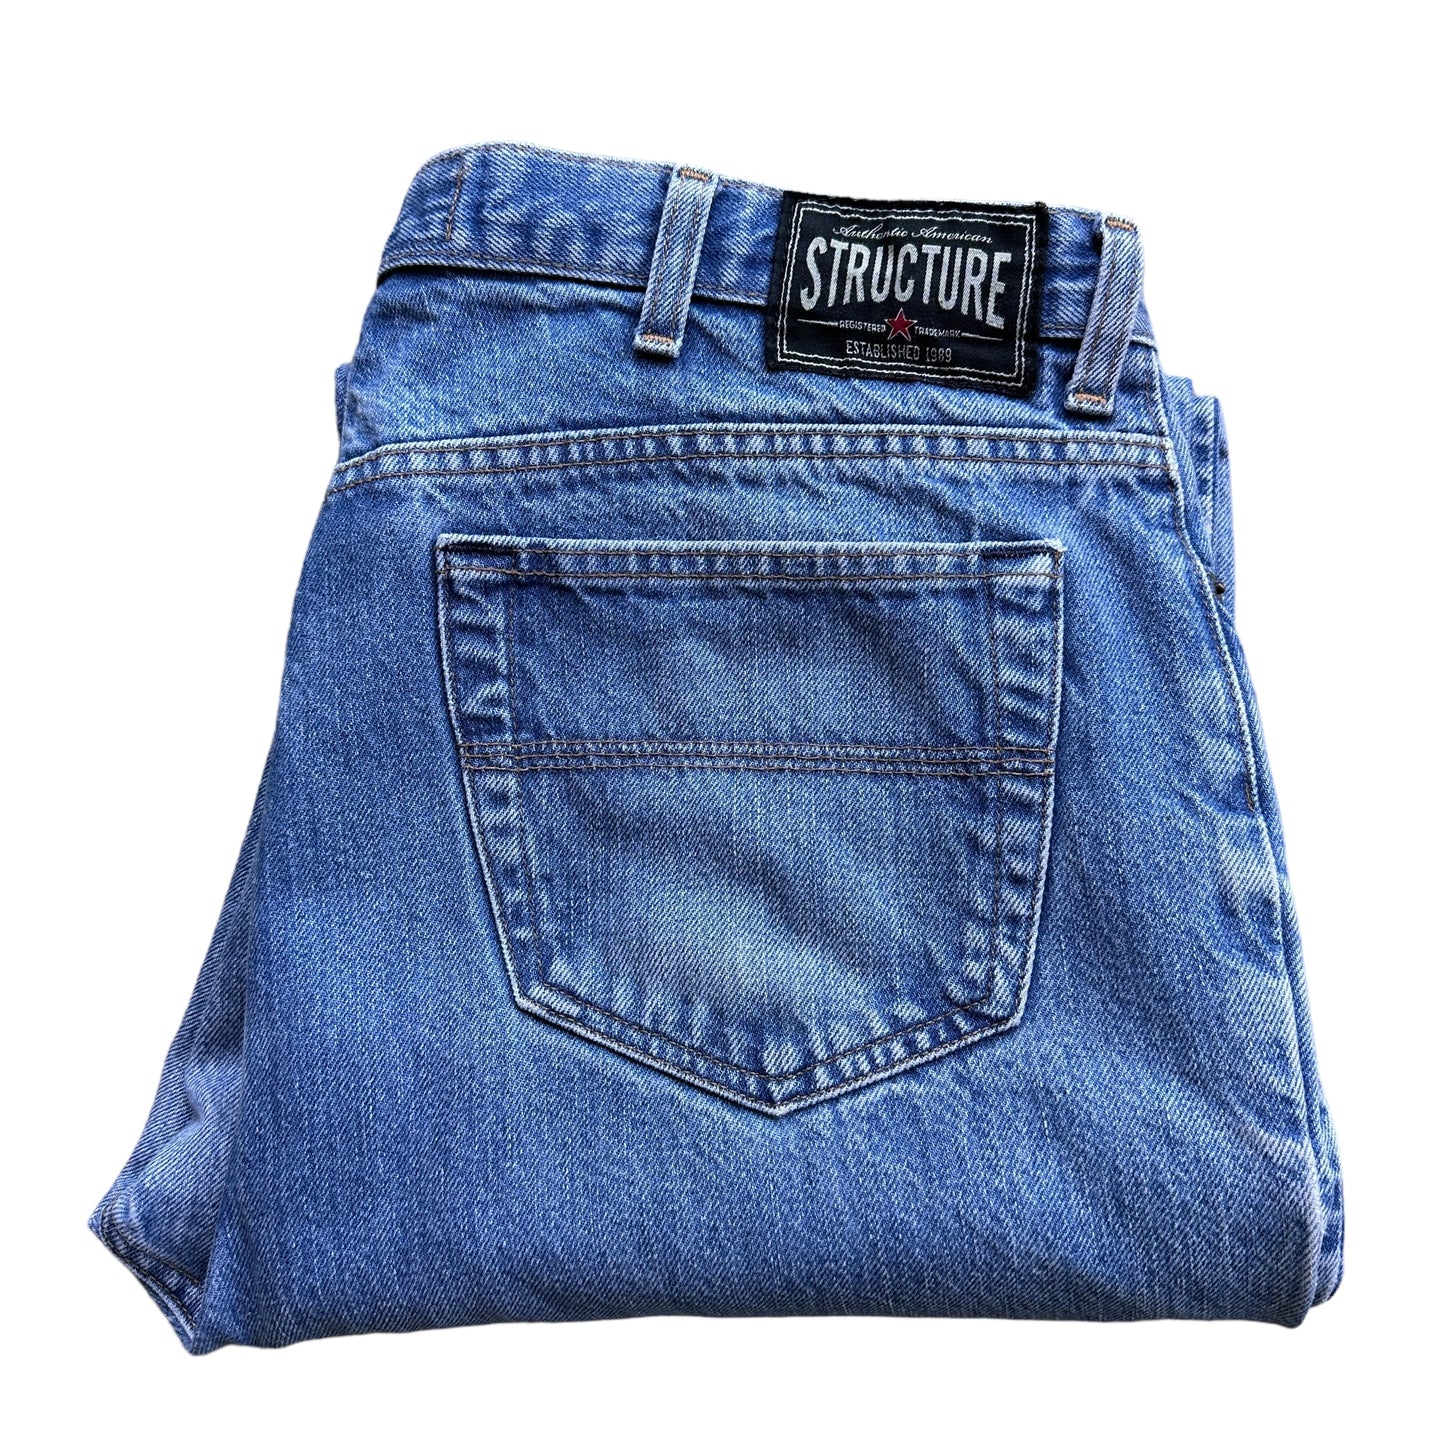 90s Structure jeans 36/30